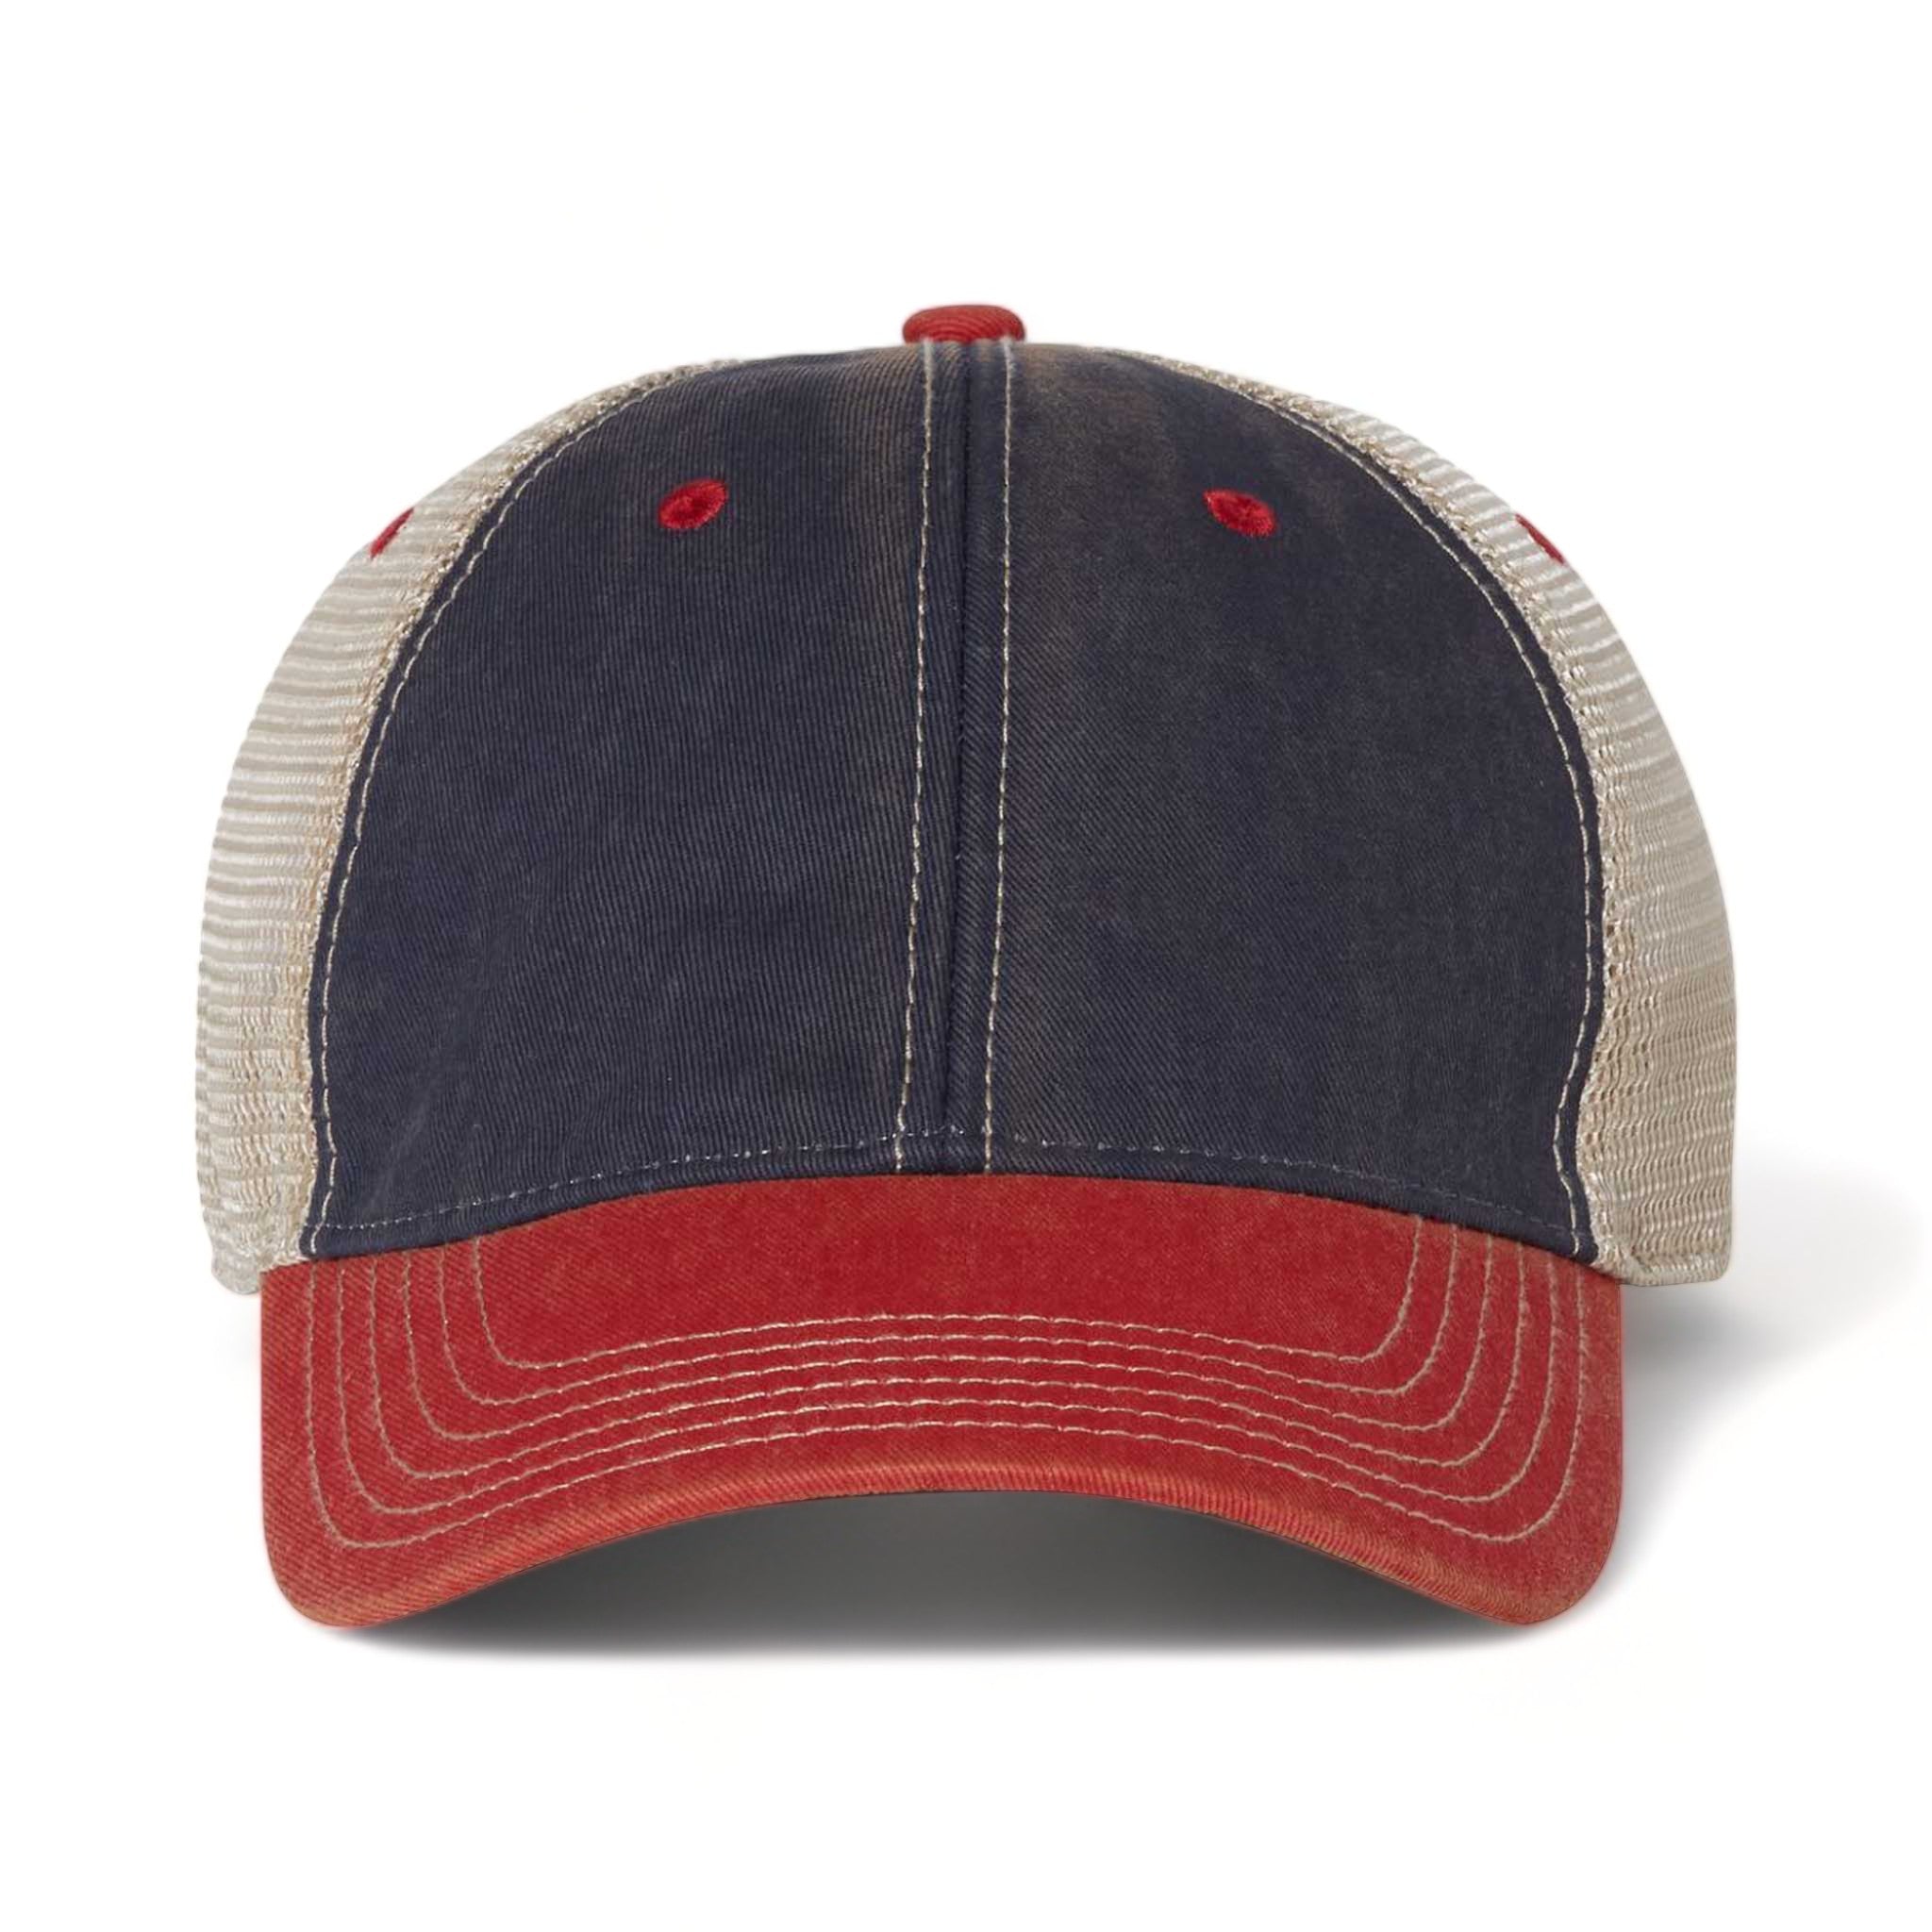 Front view of LEGACY OFA custom hat in navy, scarlet red and khaki